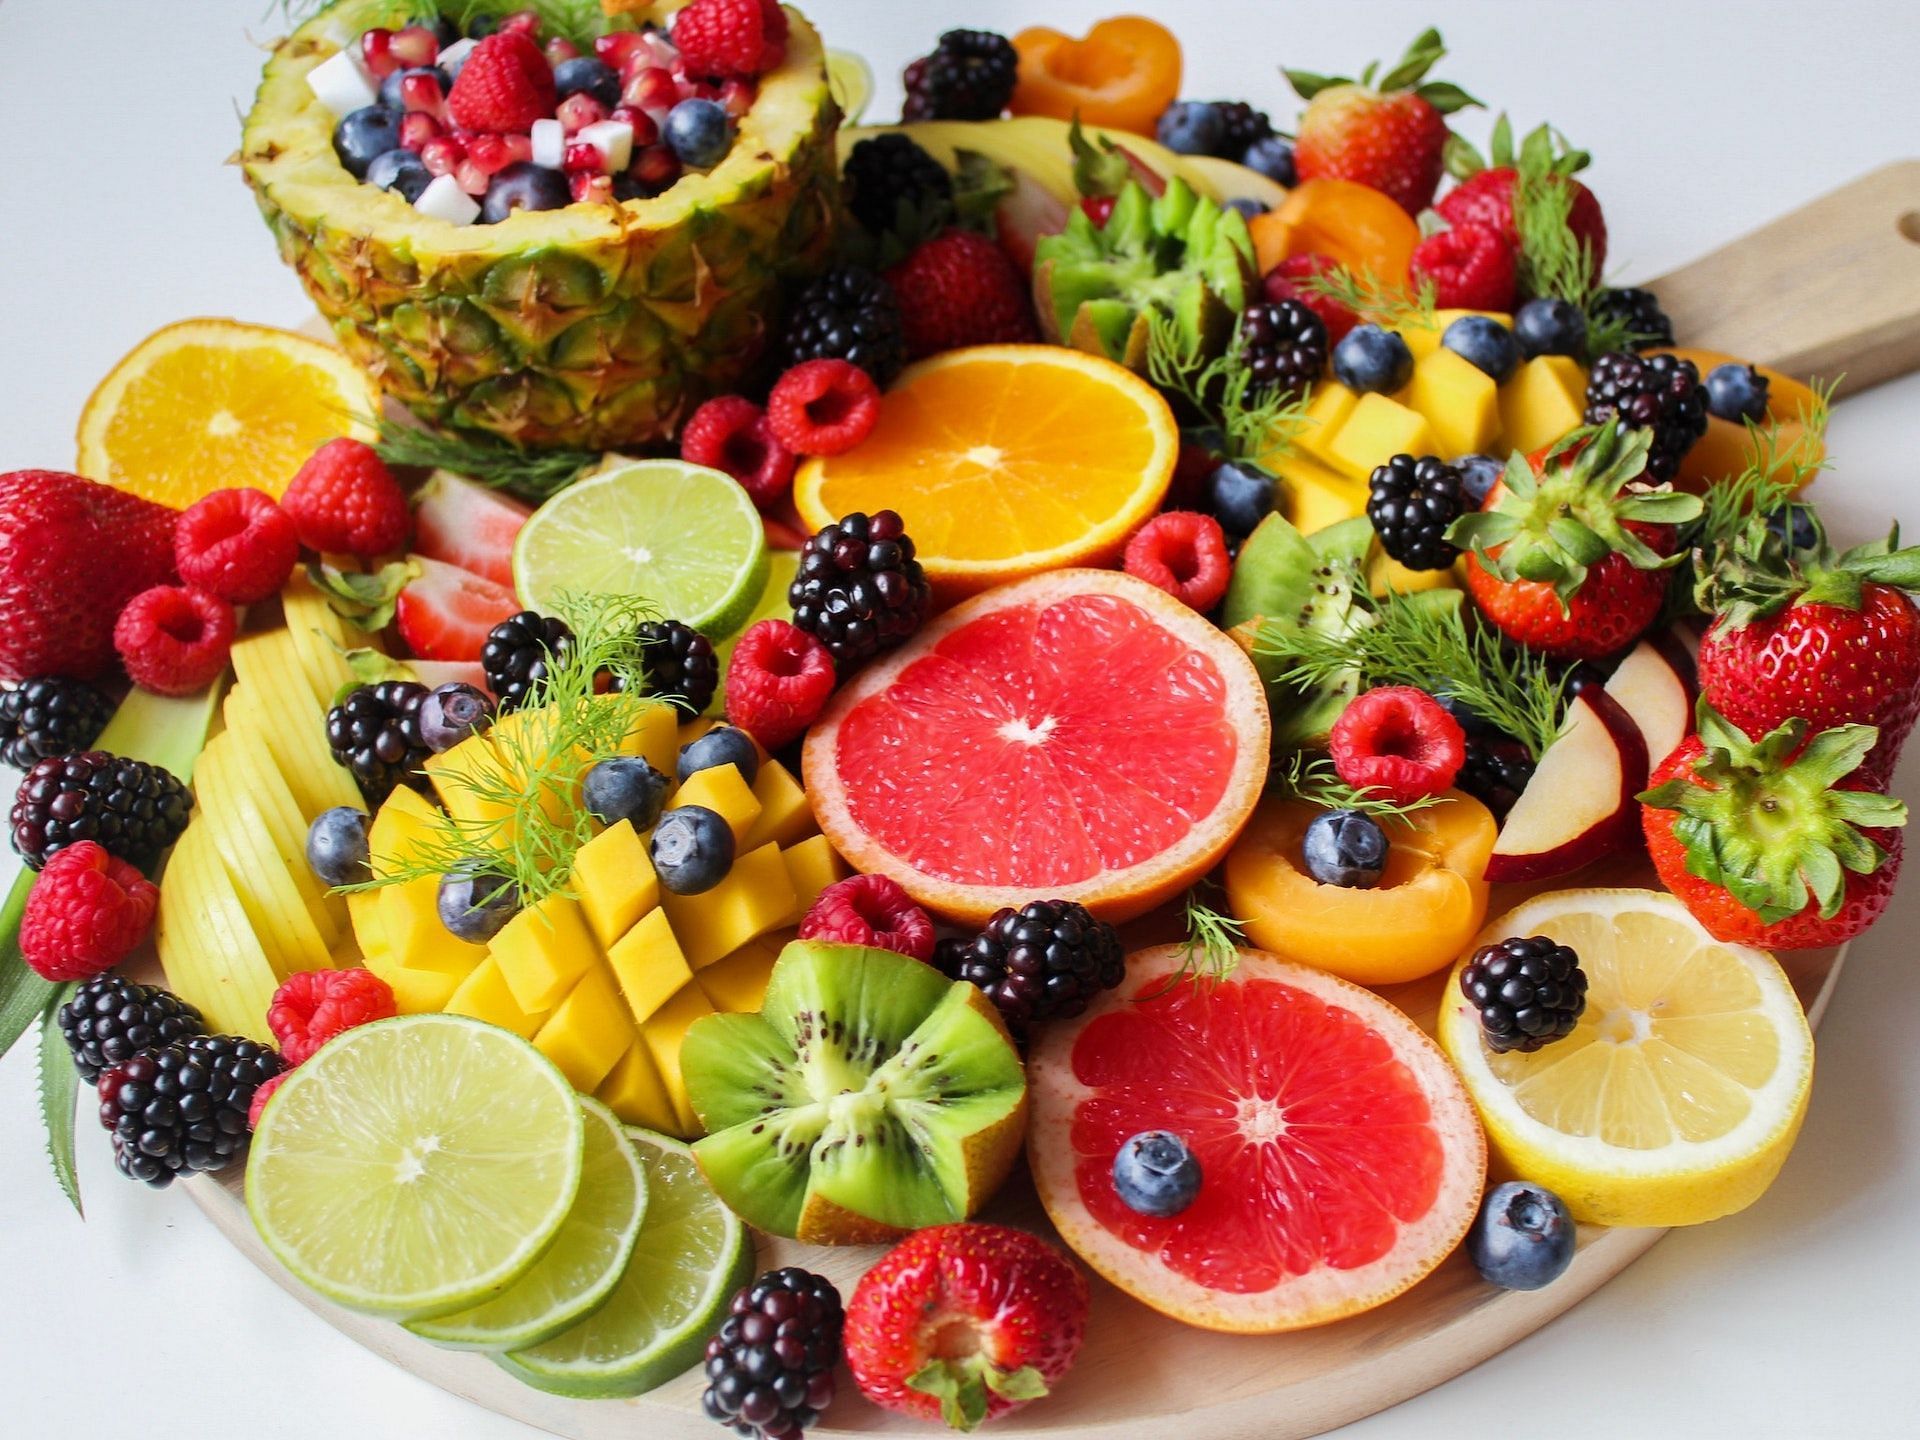 Fruits are rich in differenet types of vitamins. (Photo via Pexels/Jane Doan)